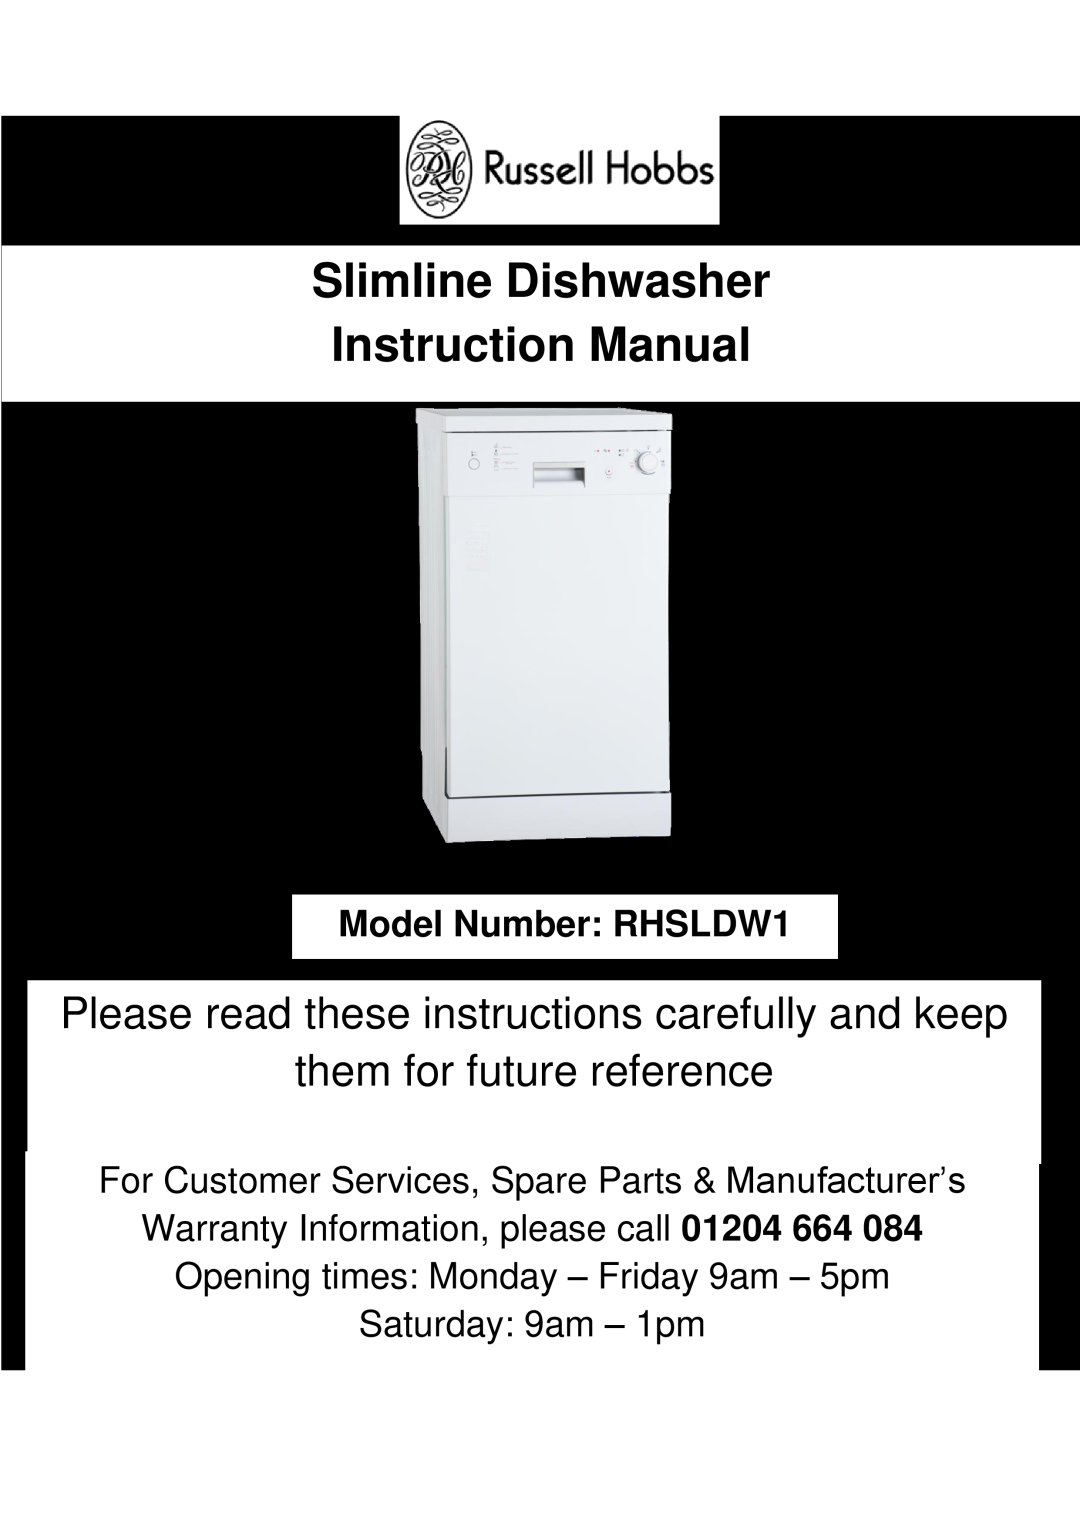 Russell Hobbs RHSLDW1 instruction manual Slimline Dishwasher Instruction Manual, them for future reference 